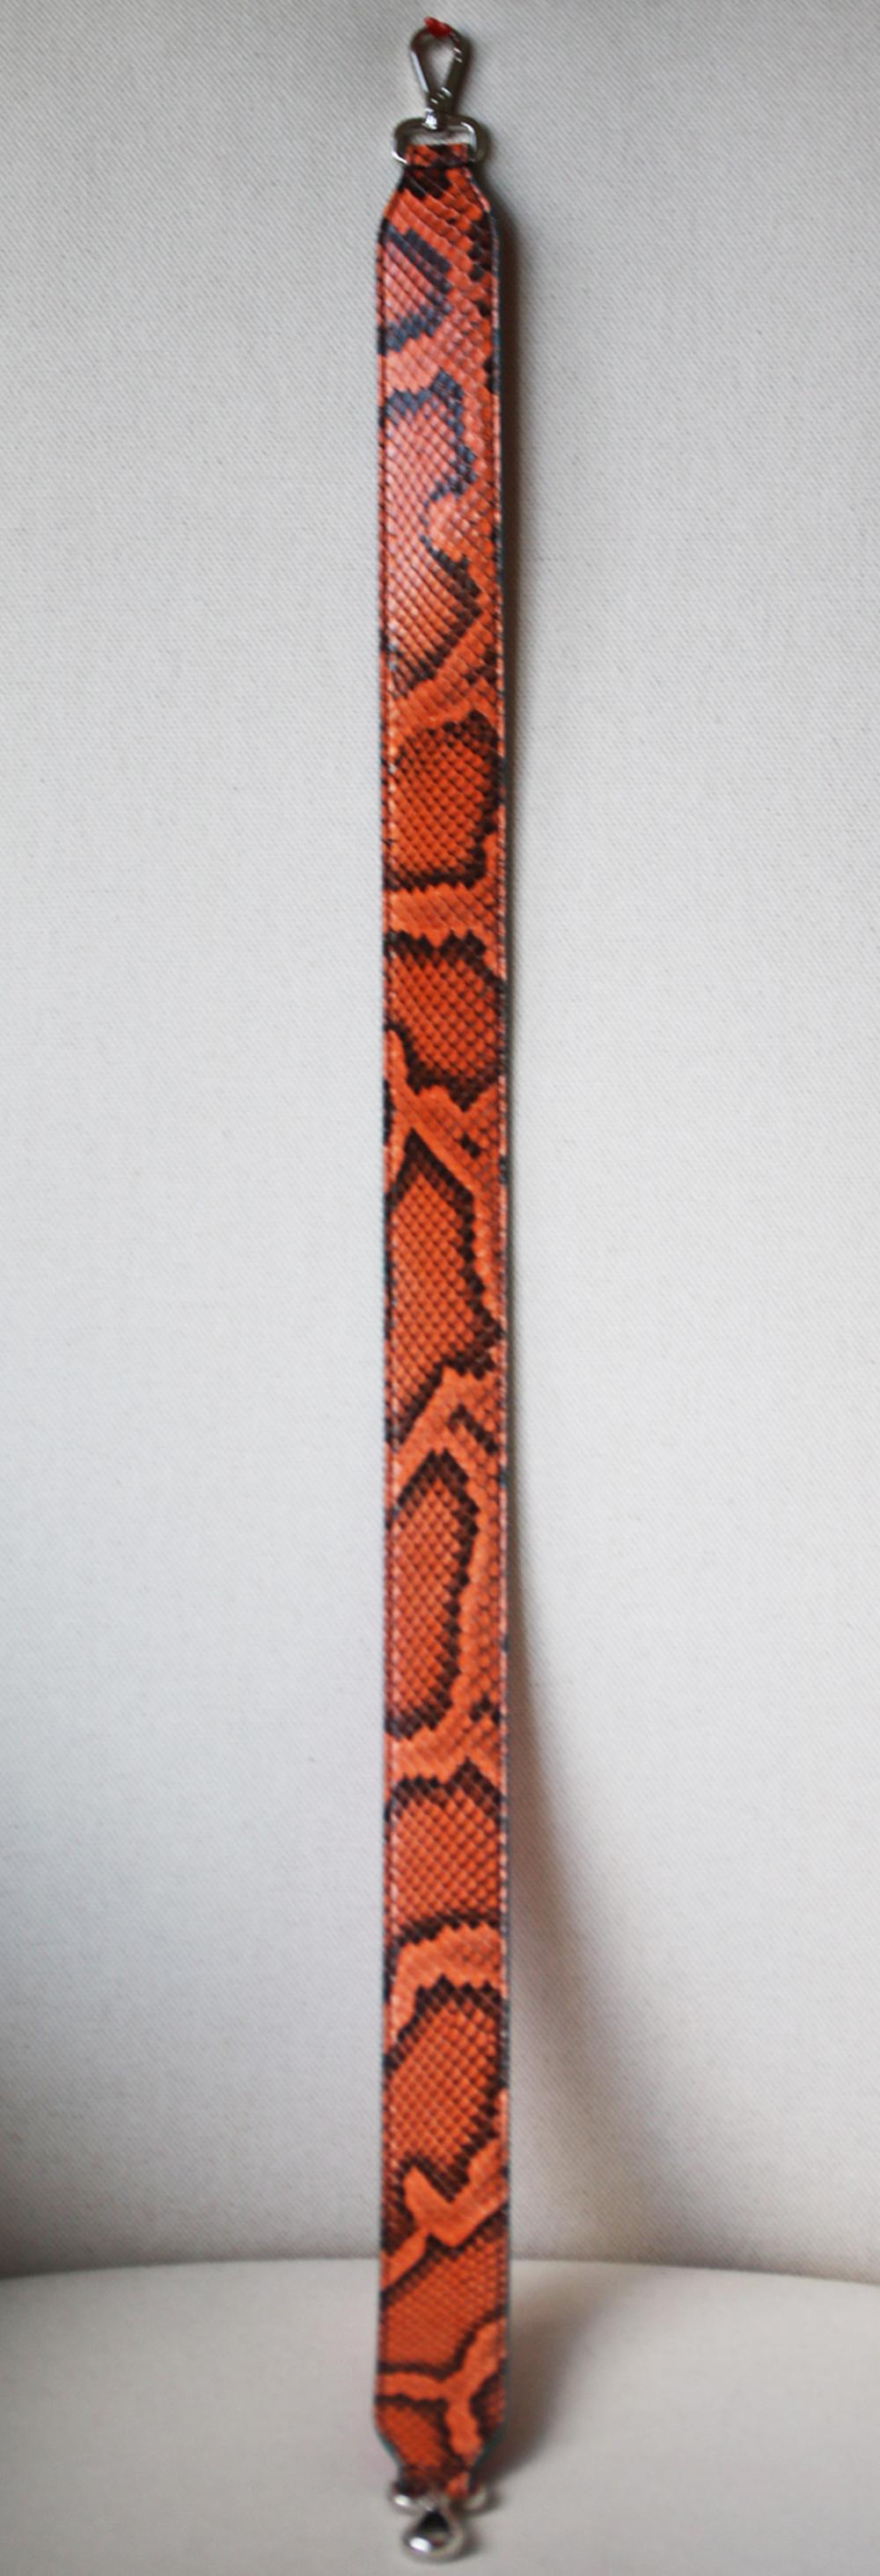 Fendi's bag strap is crafted from luxurious deep orange python and supple bright-pink leather. This thick style is finished with turquoise-blue trims and designed to attach to your favourite tote for hands-free wear. Orange python, bright-pink and